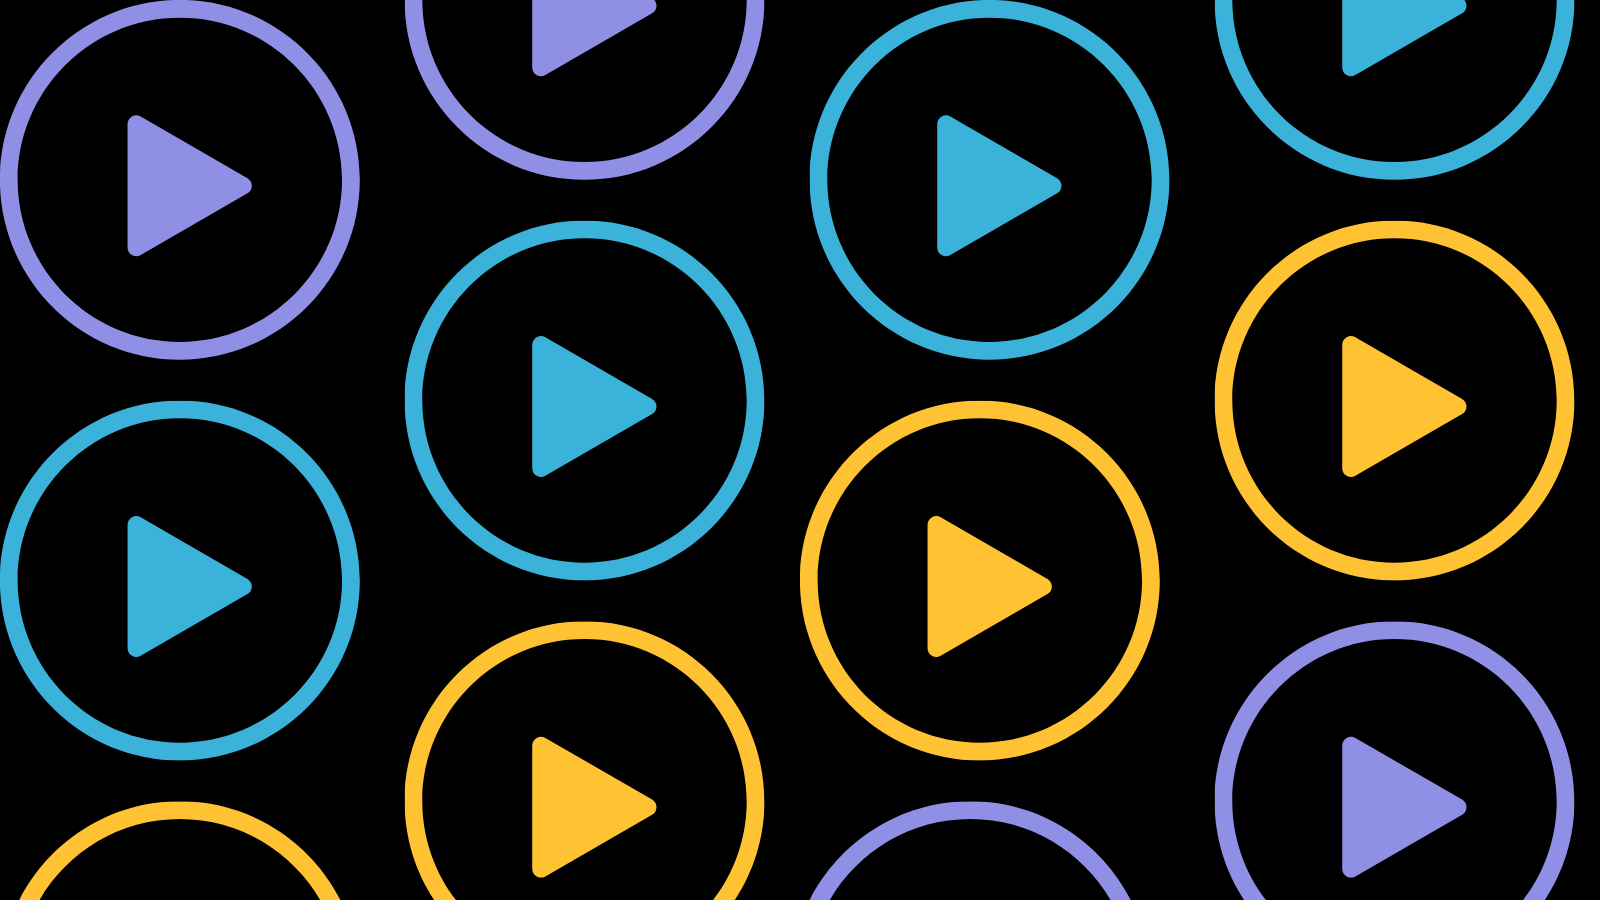 Diagonal rows of play buttons in bright colors